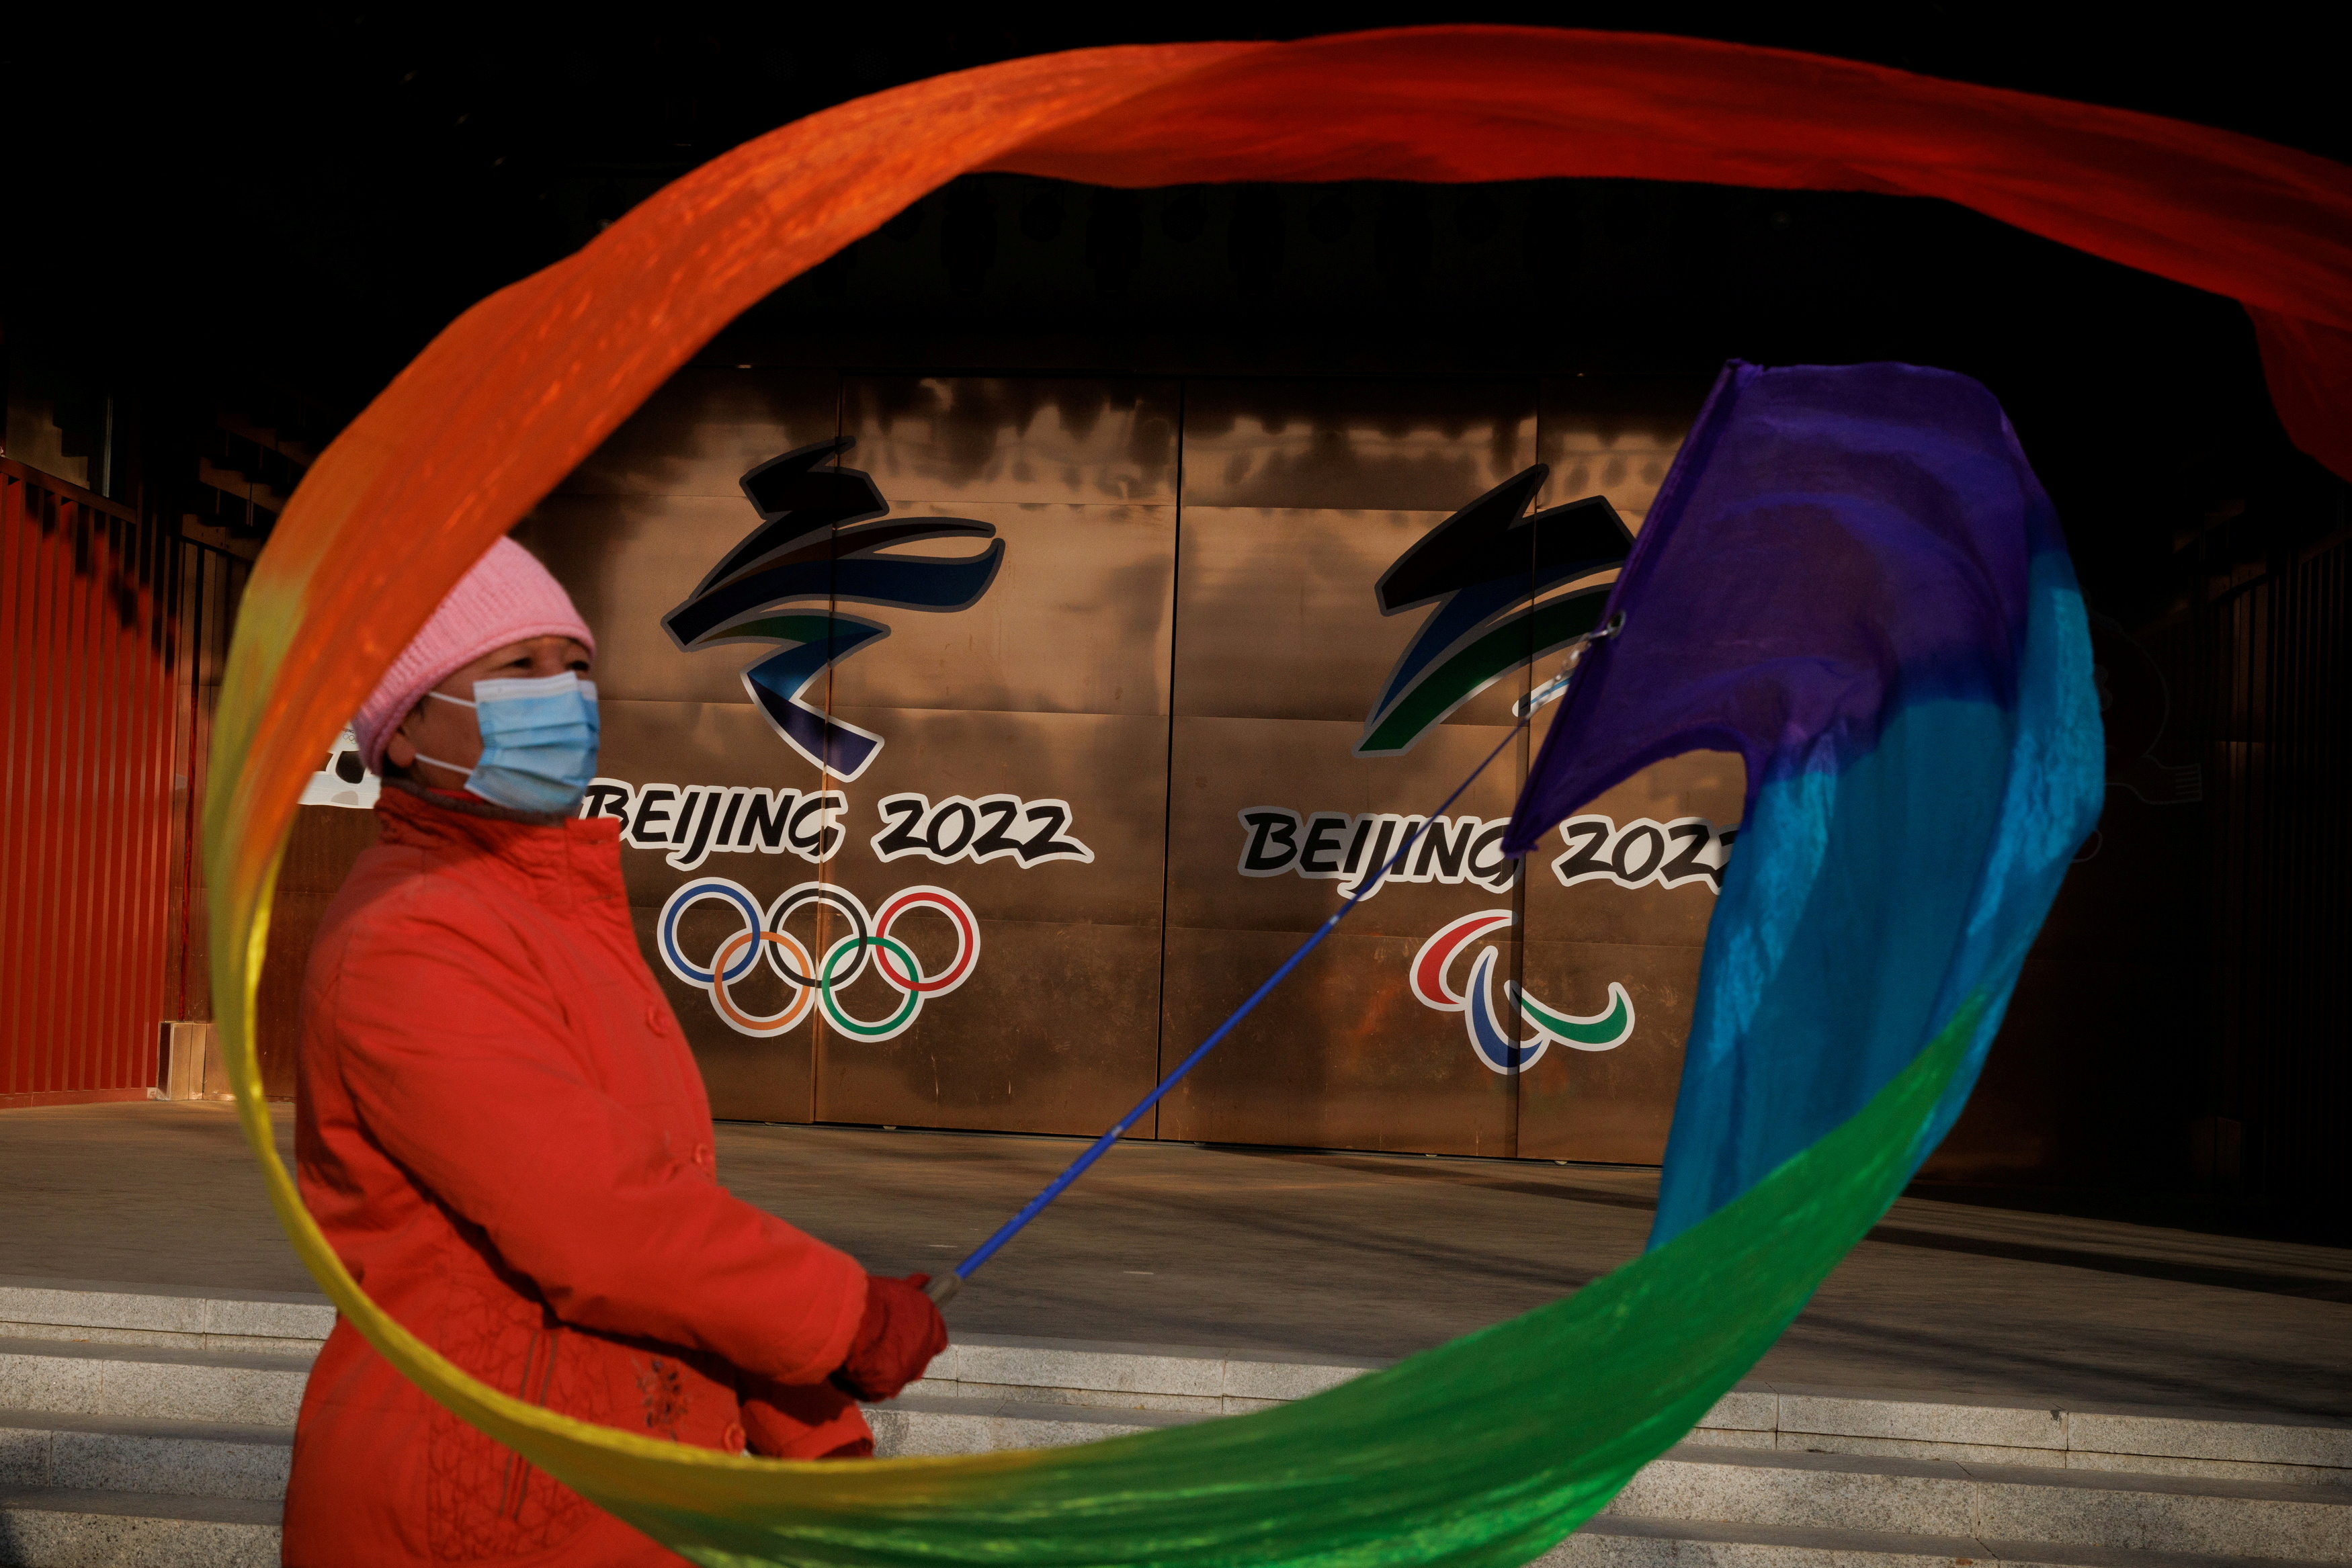 A woman flies a ribbon near the logos of the Beijing 2022 Olympic and Paralympic Games in a park in Beijing